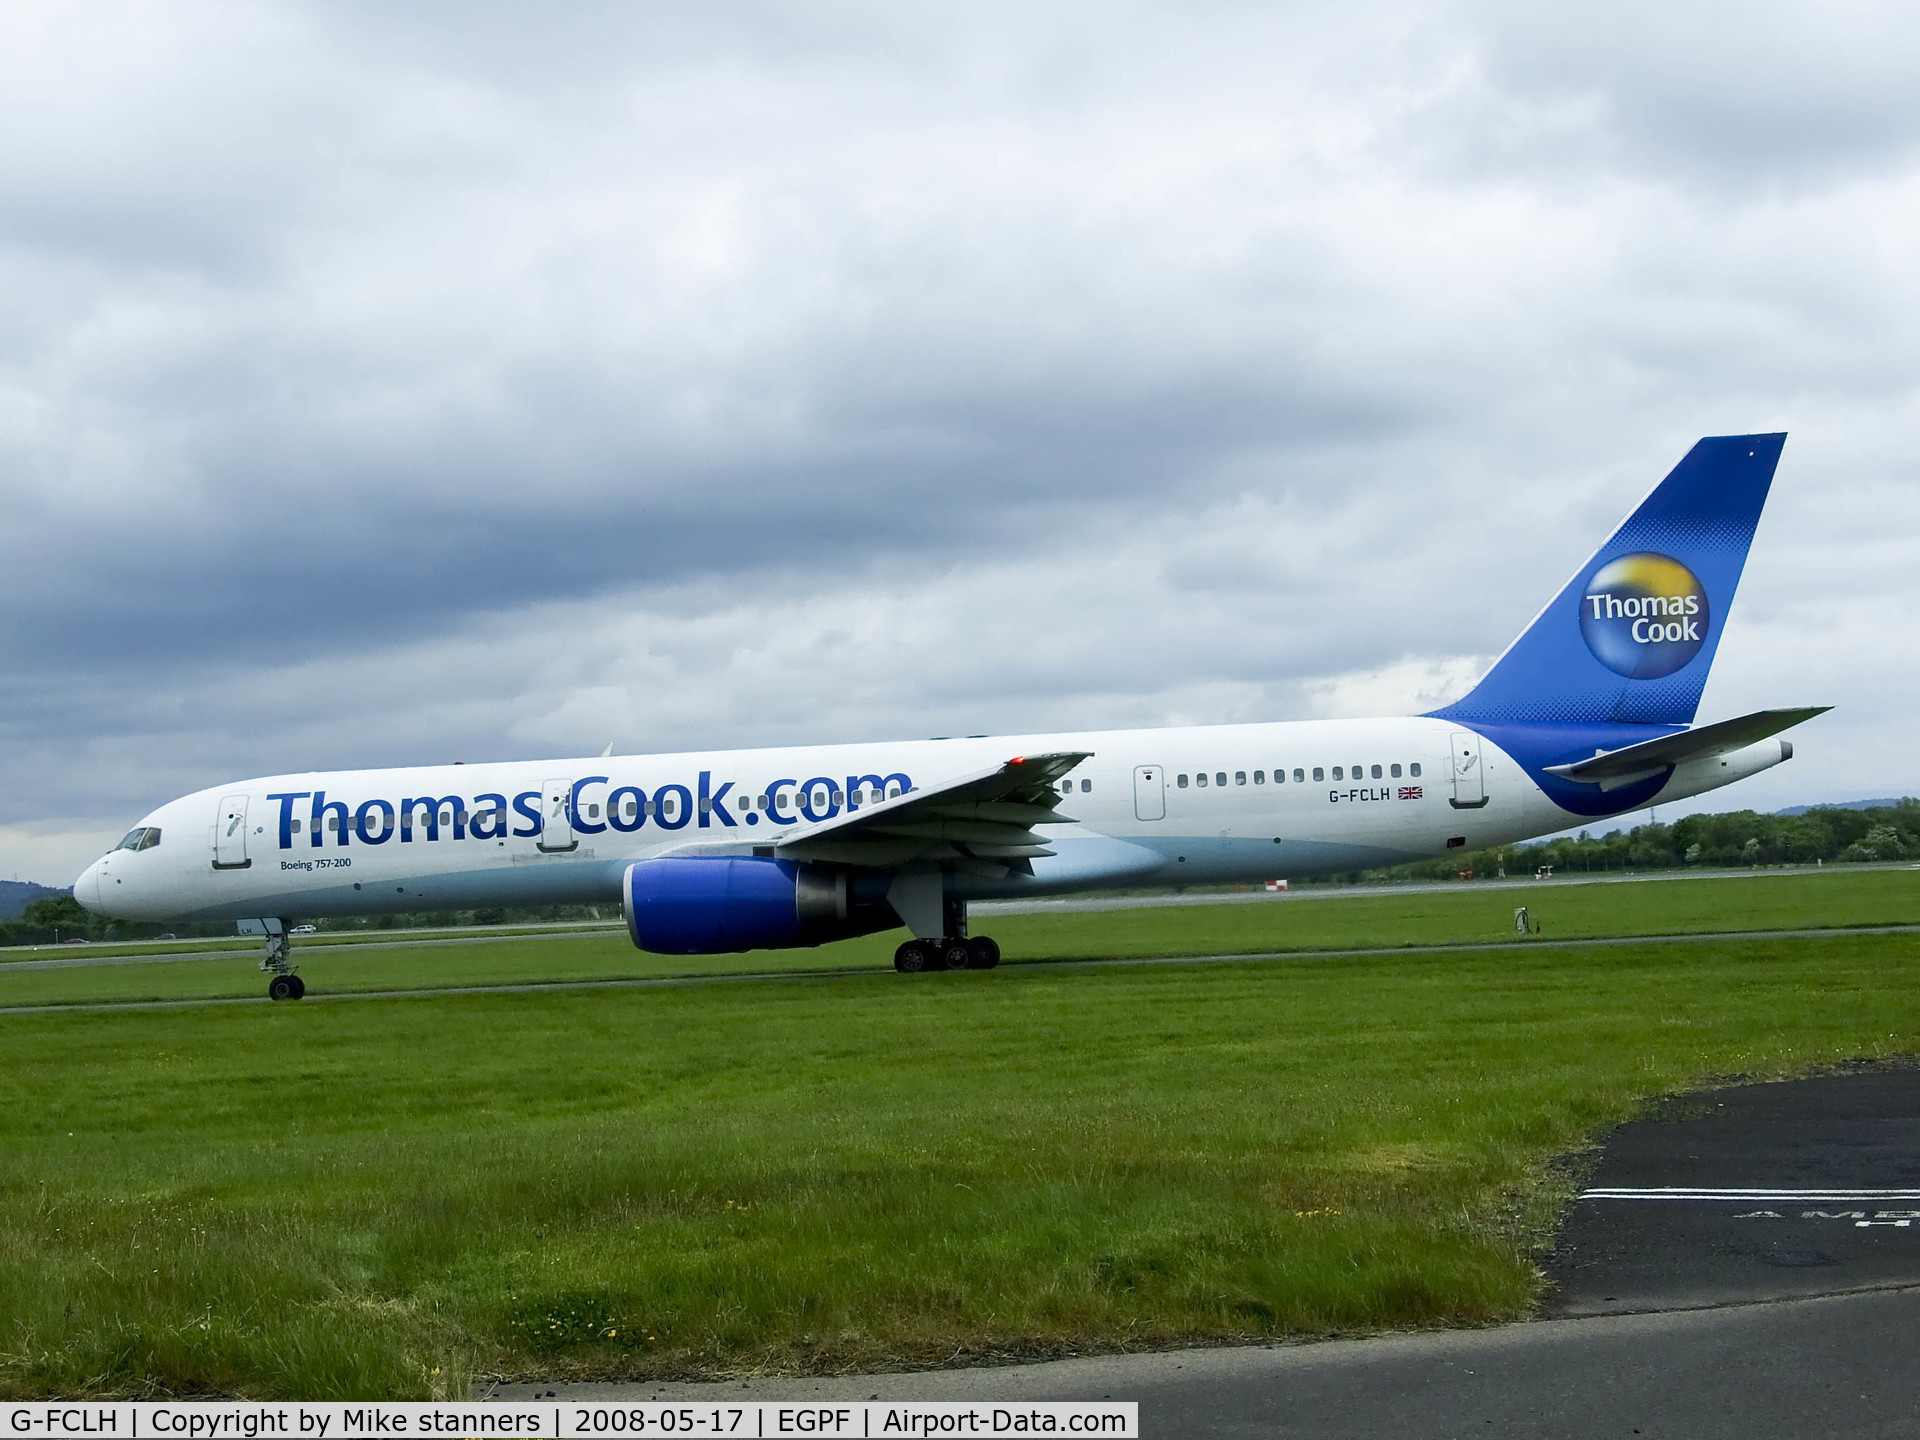 G-FCLH, 1995 Boeing 757-28A C/N 26274, Thomas cook 757 taxiing out at Glasgow